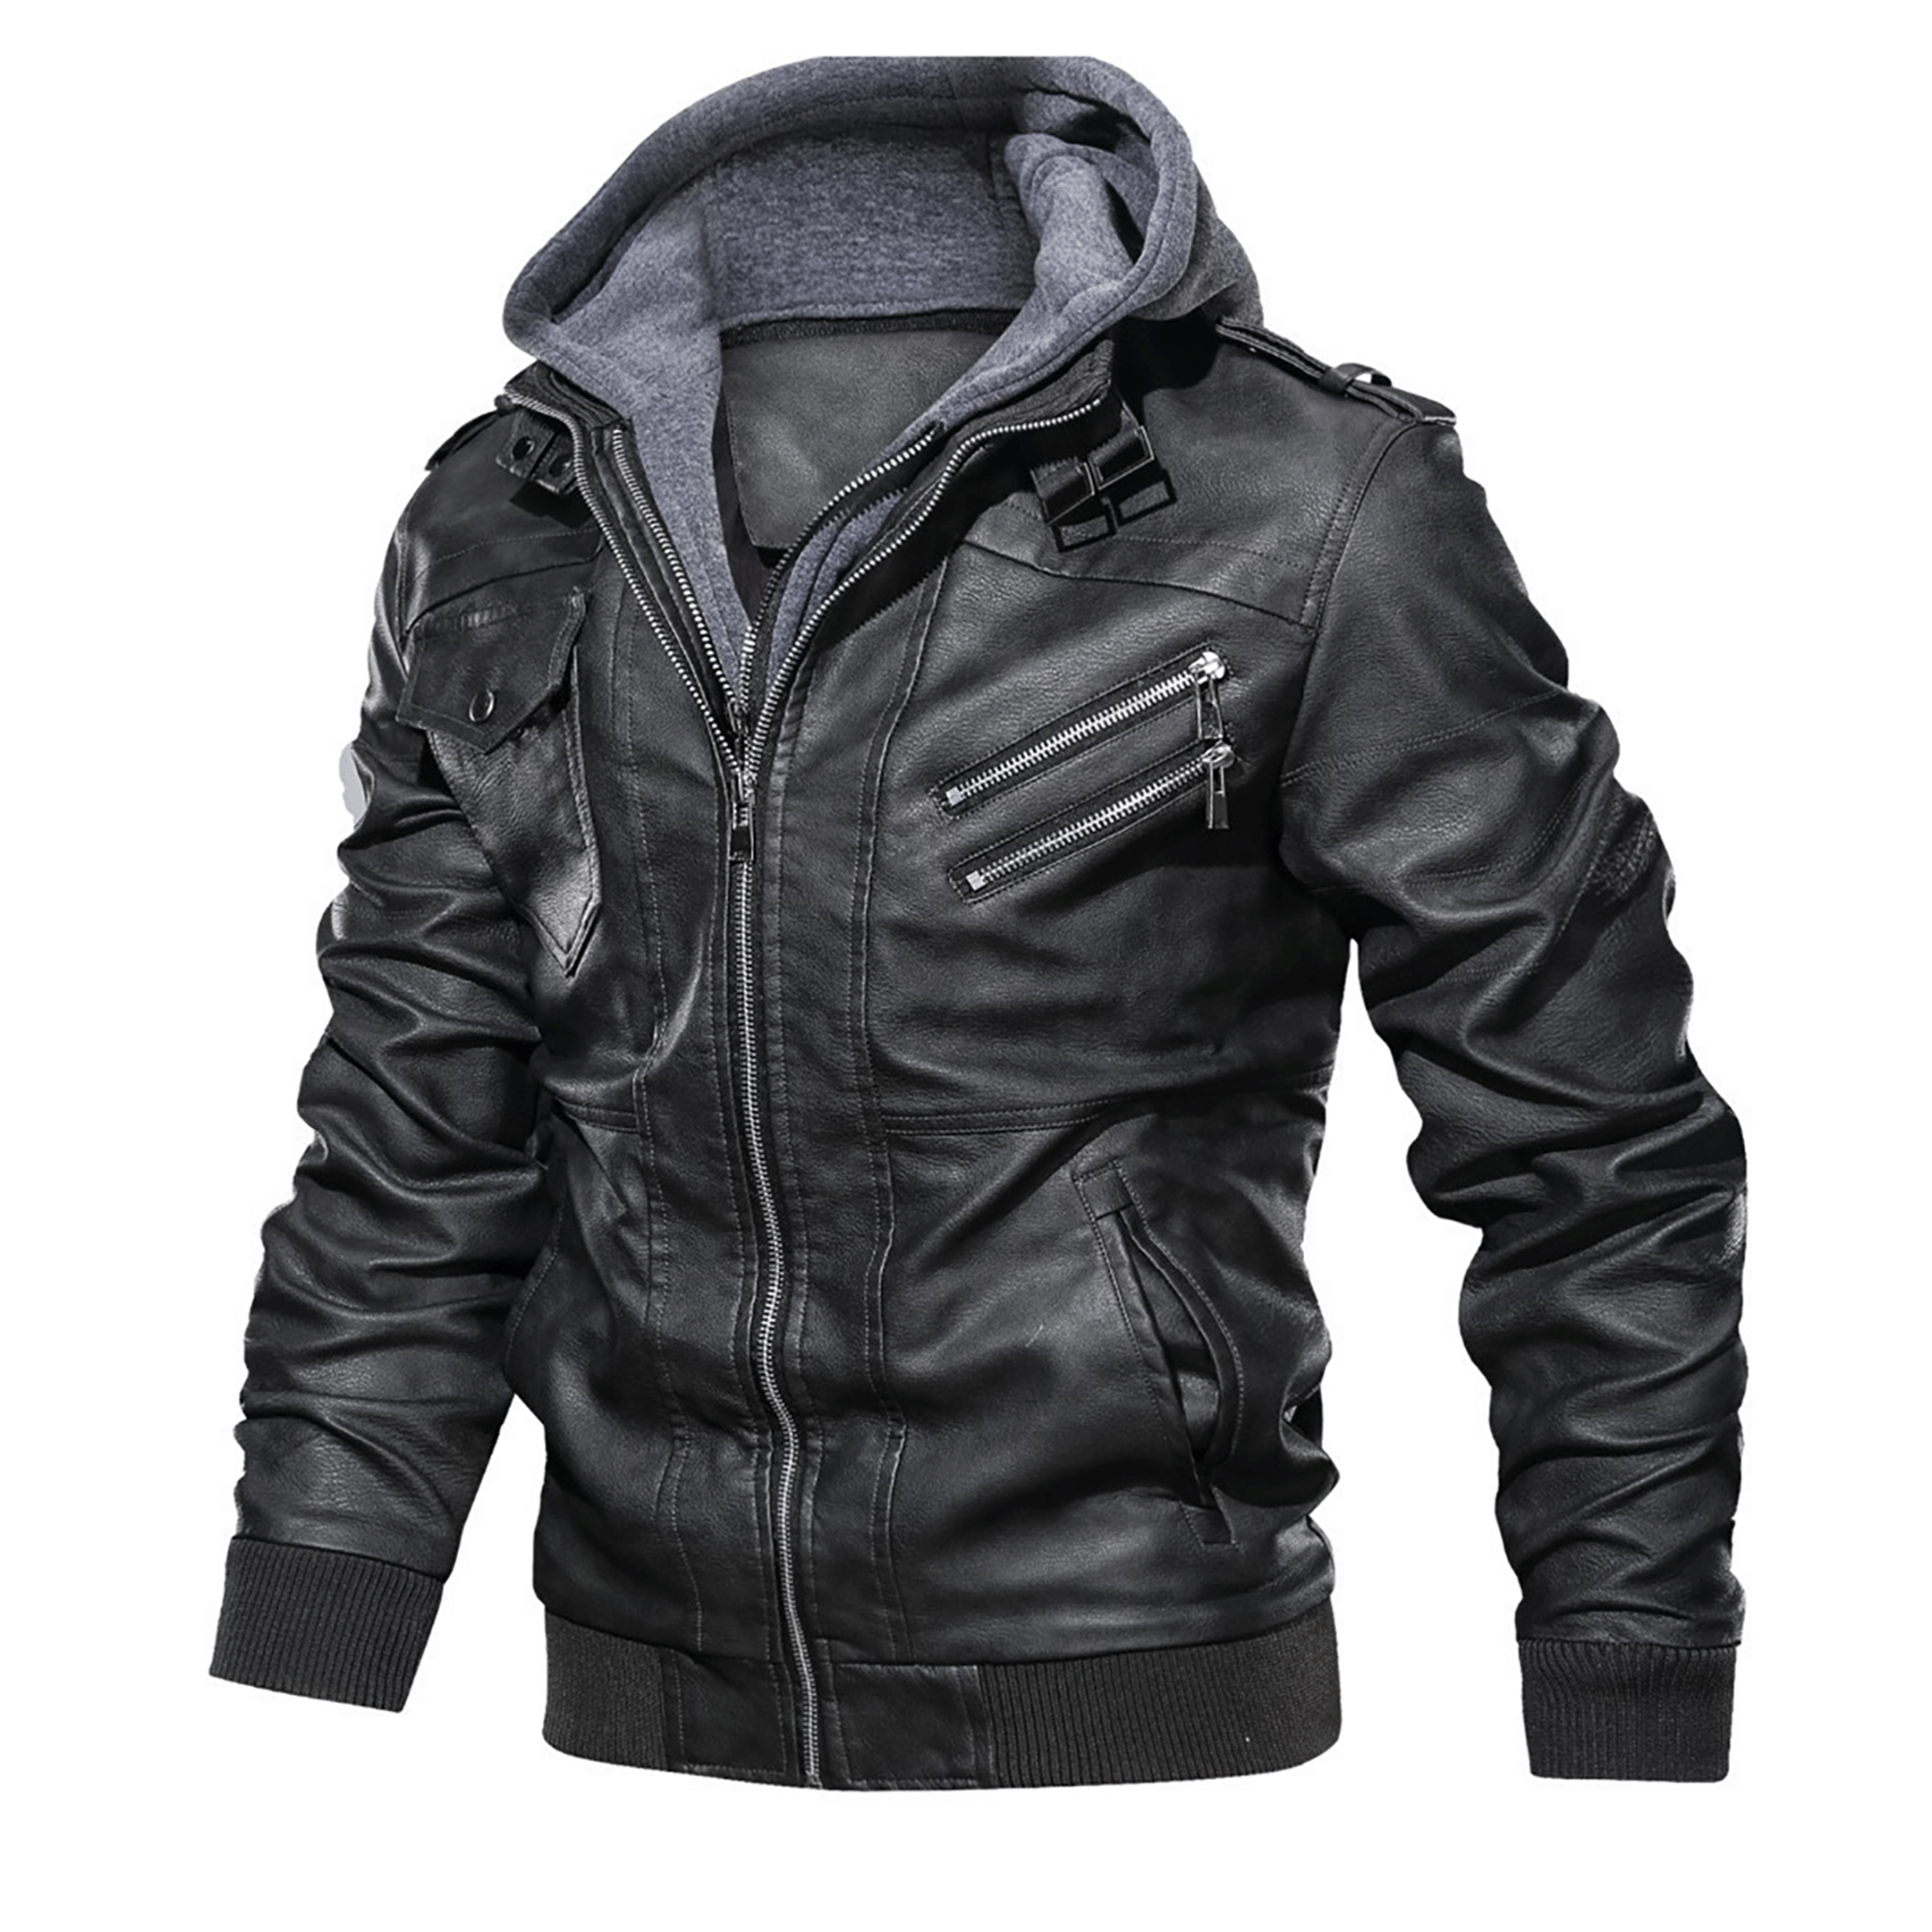 Top leather jackets and latest products 215